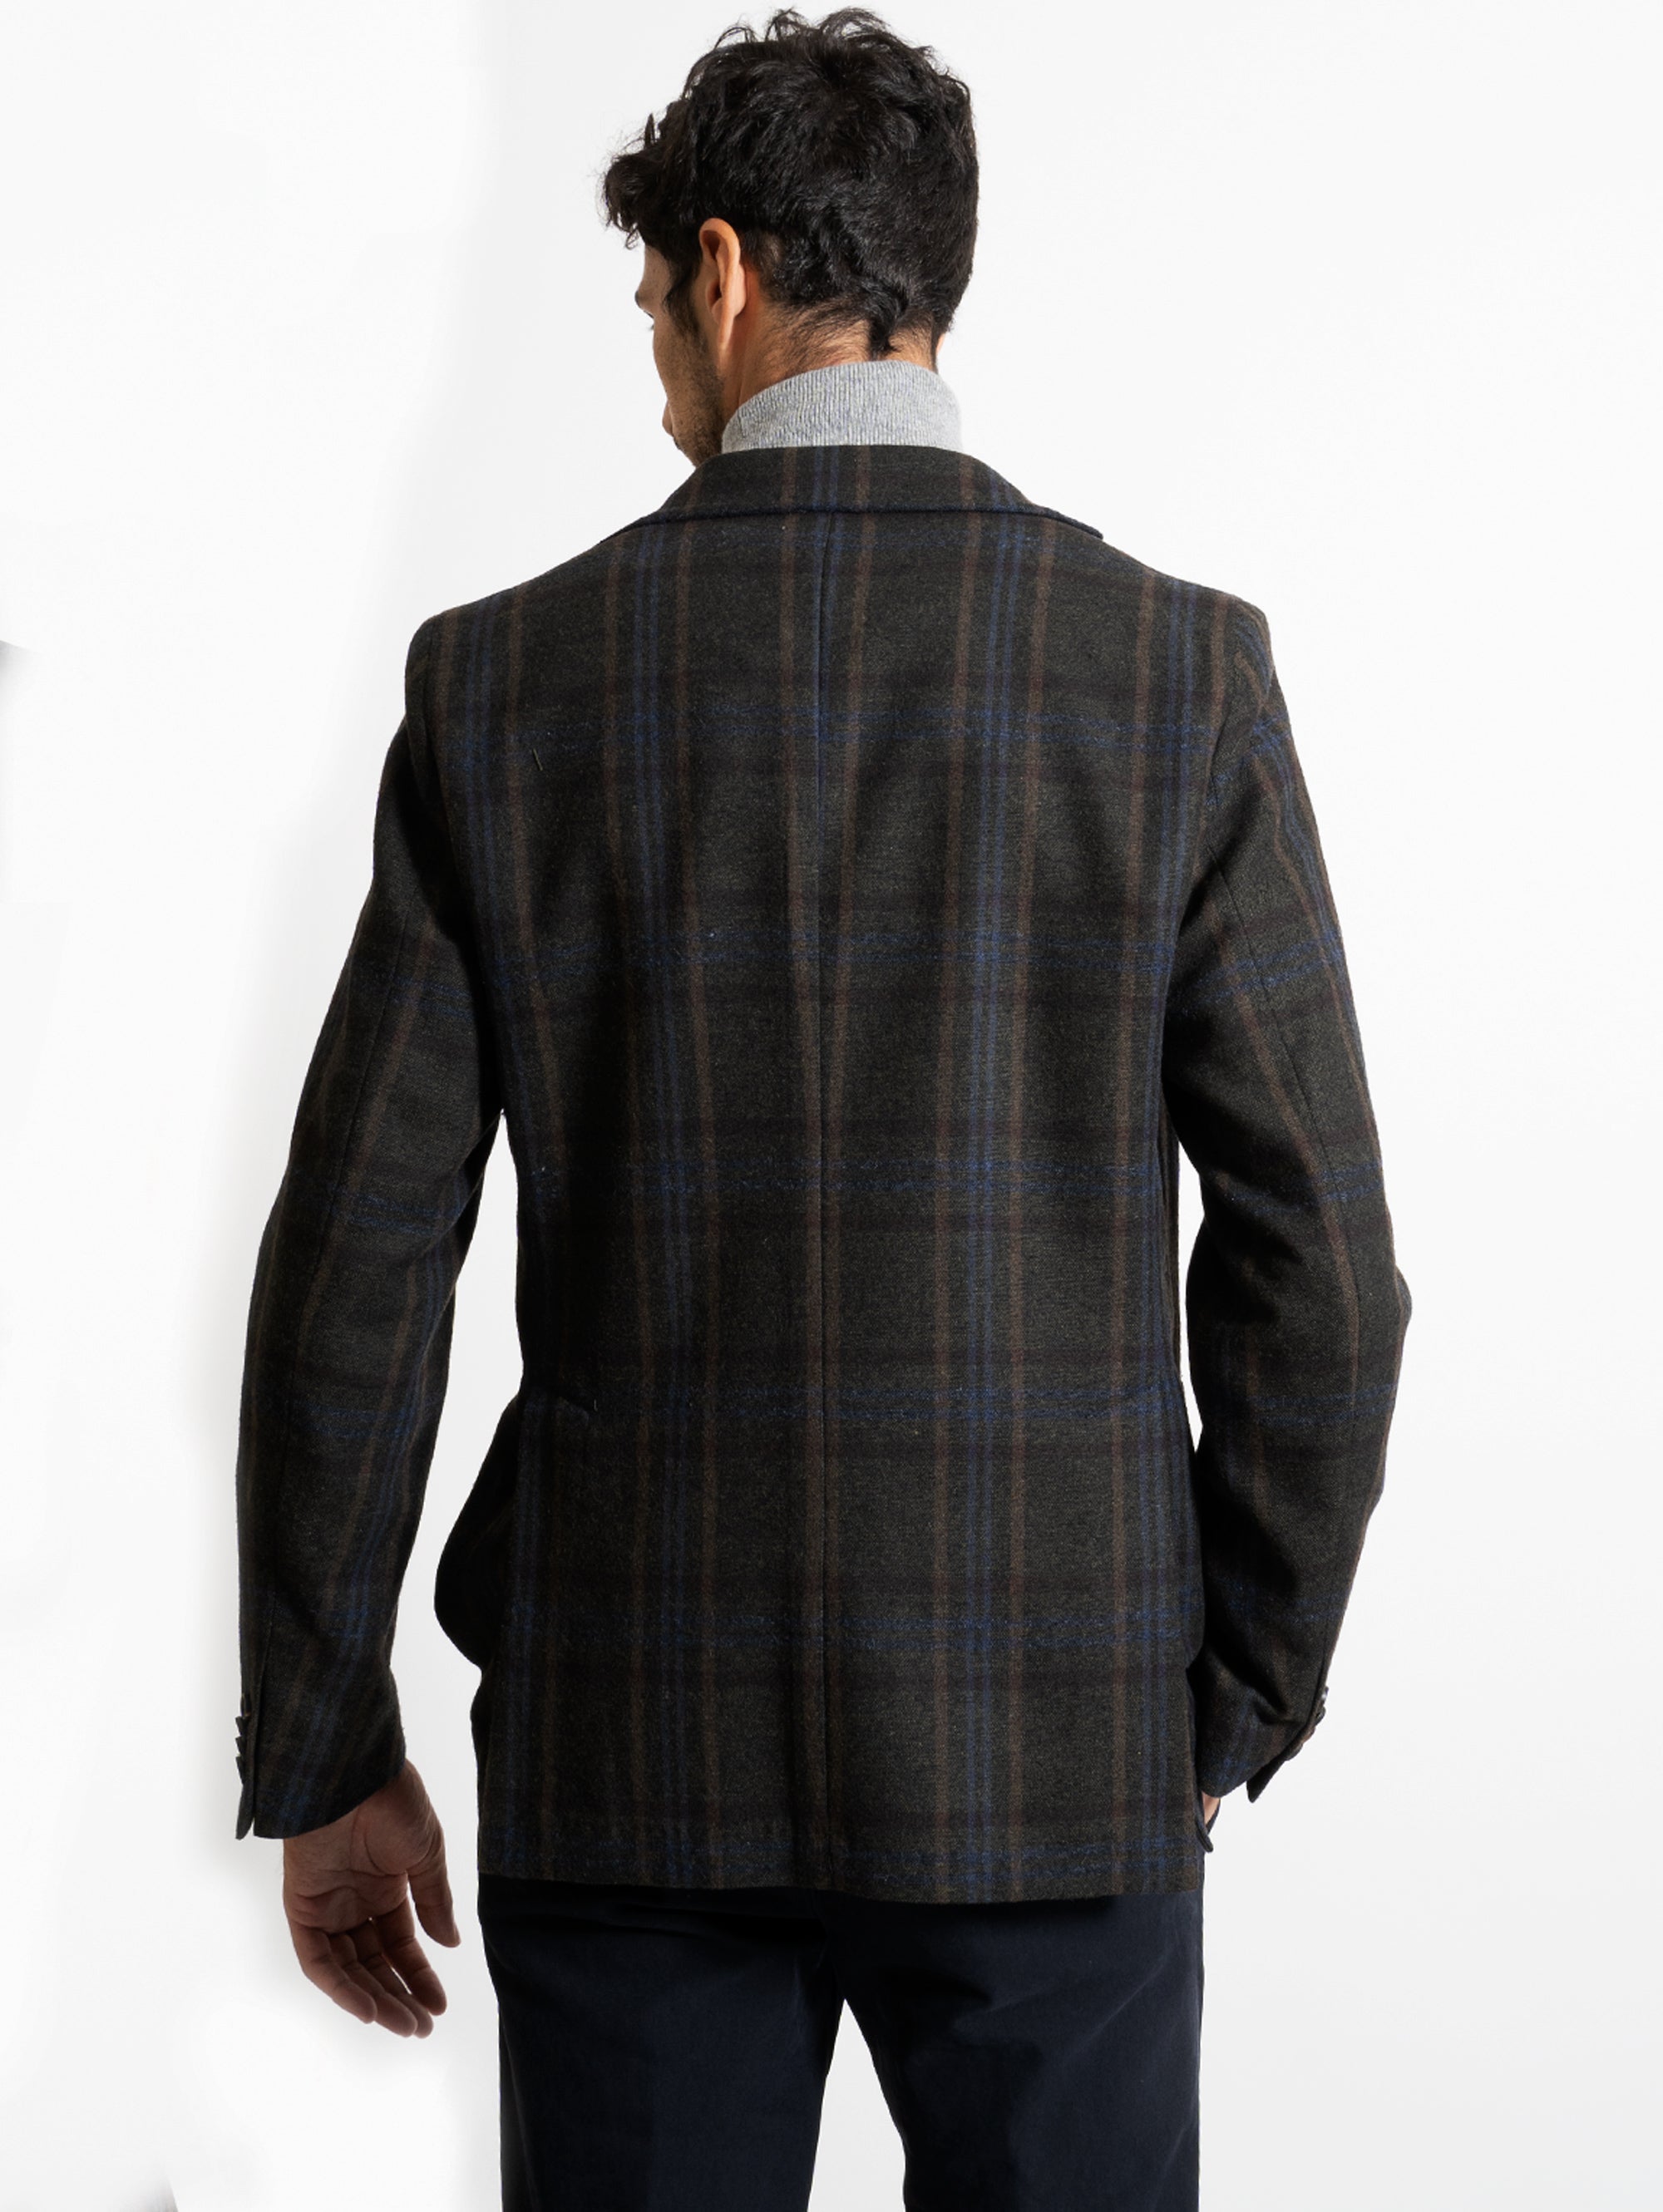 Green Check Patterned Jacket